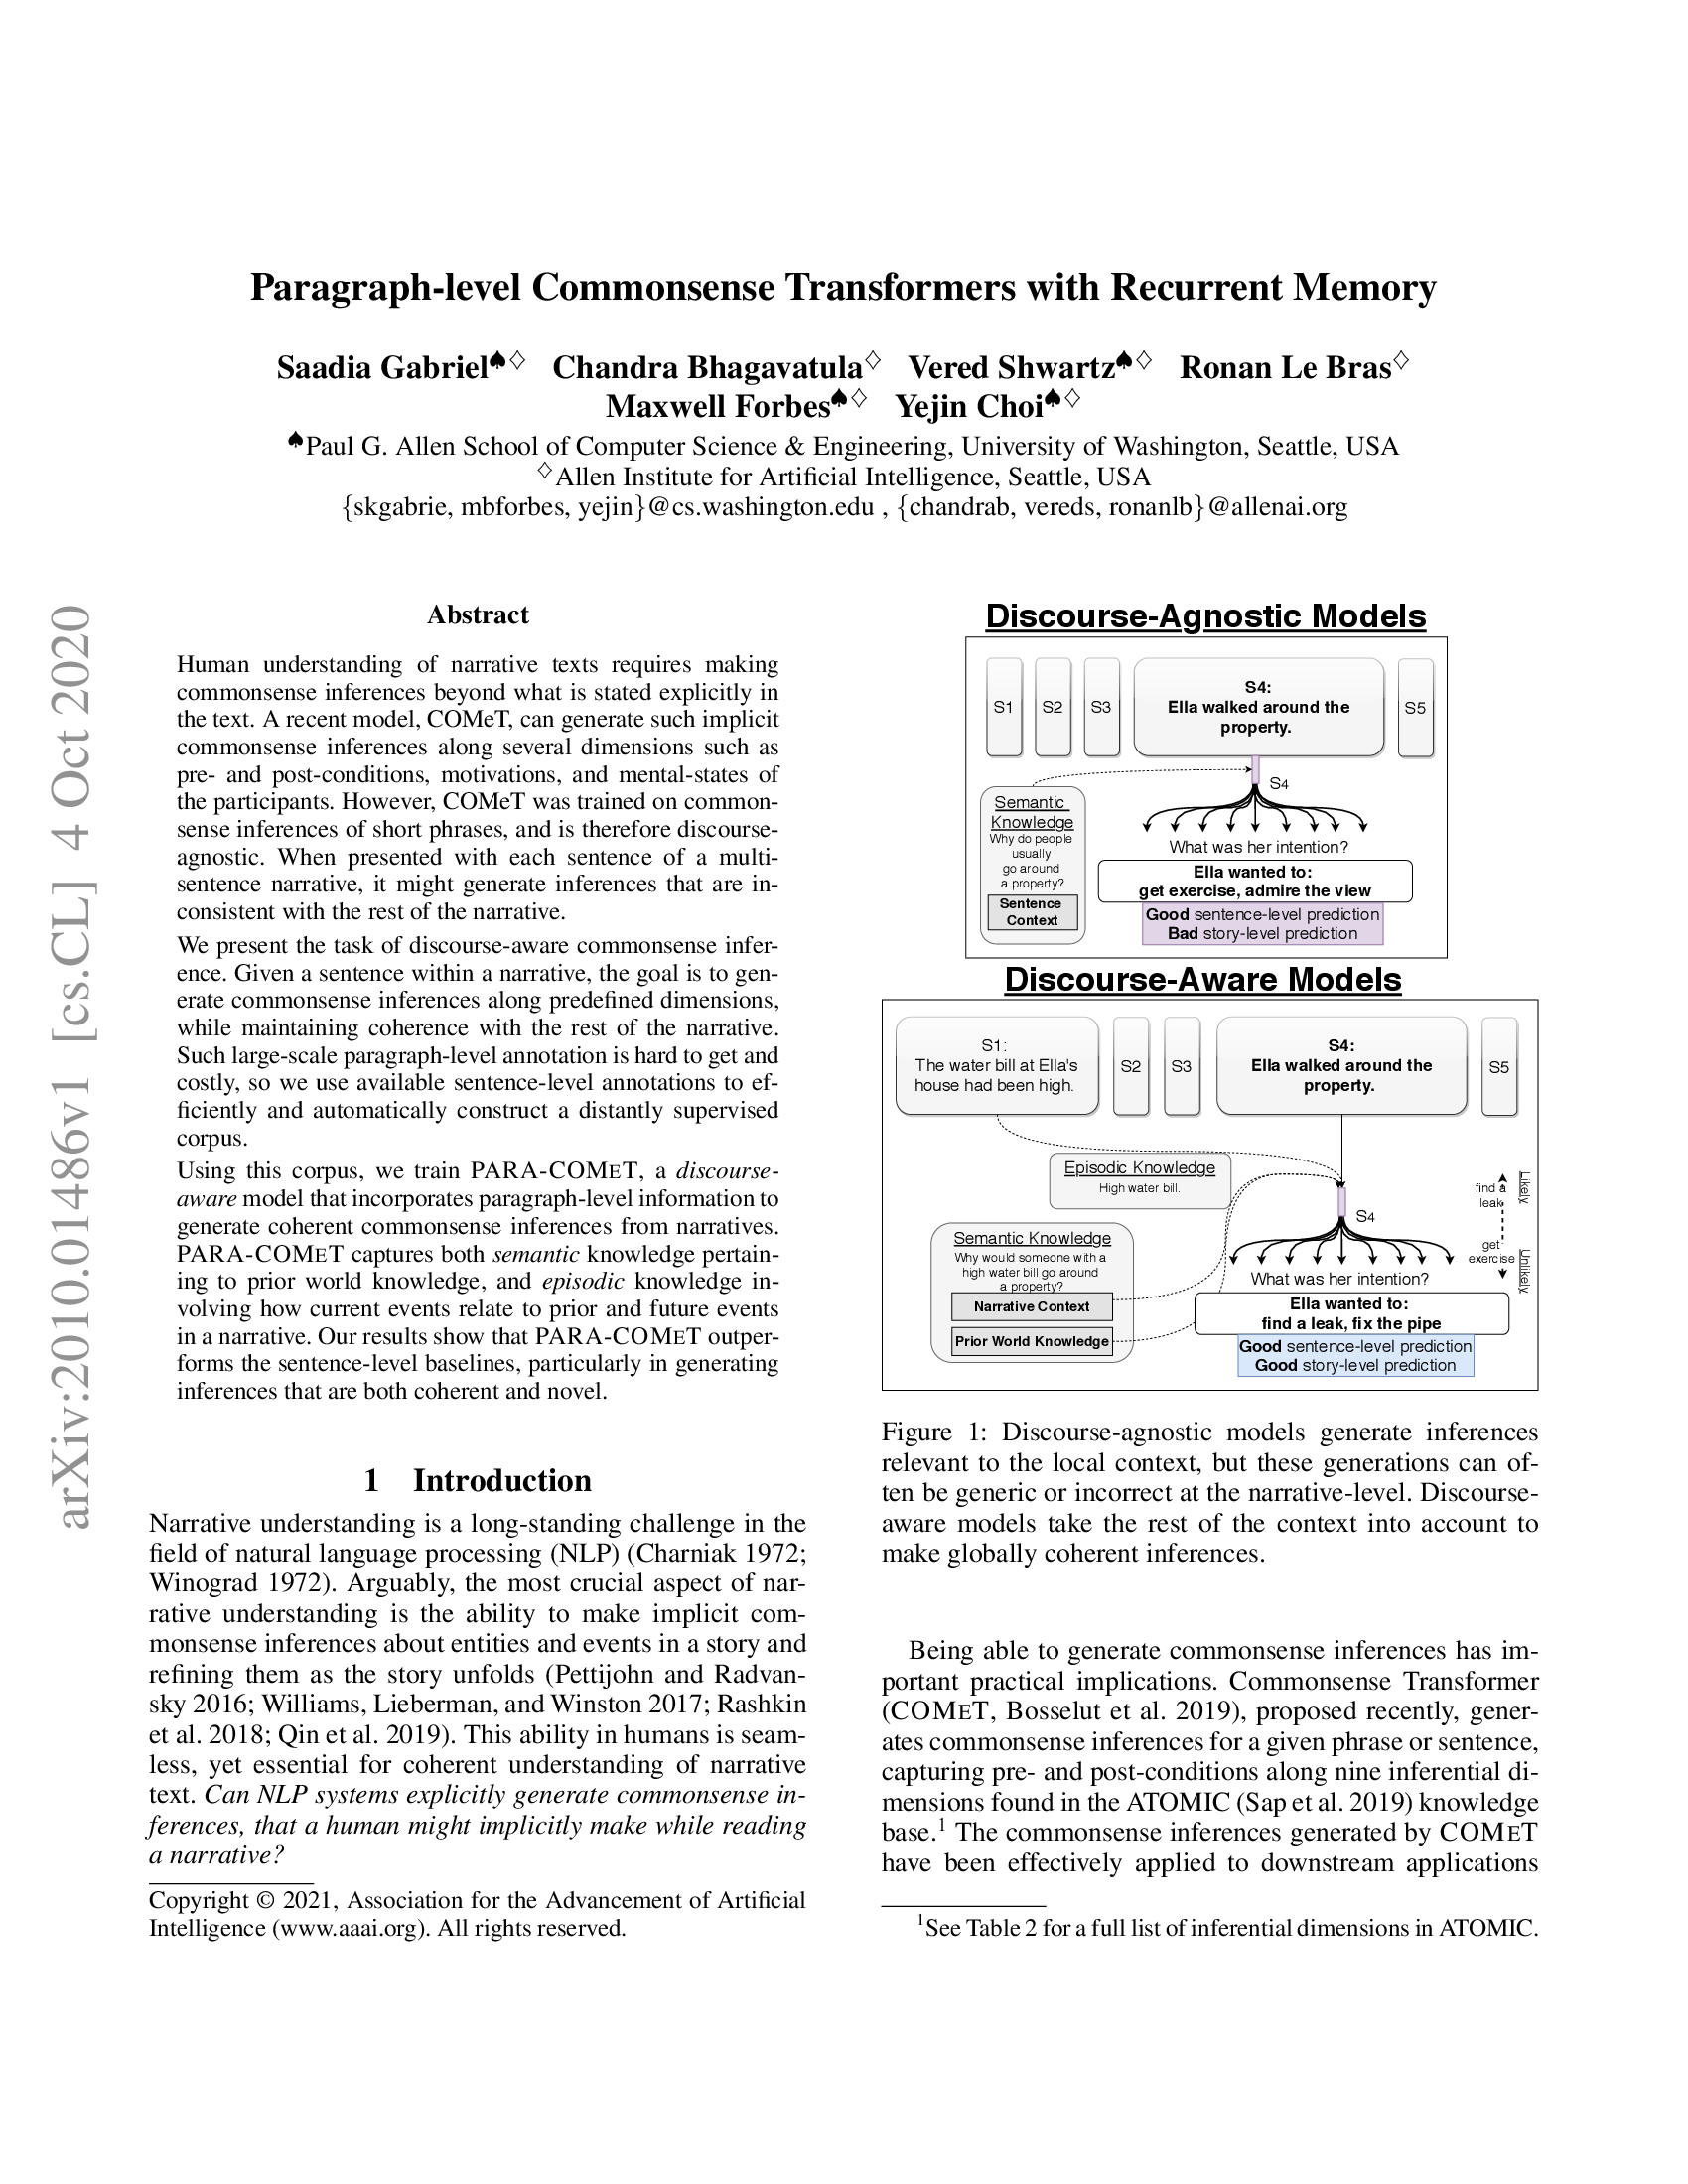 Paragraph-Level Commonsense Transformers with Recurrent Memory